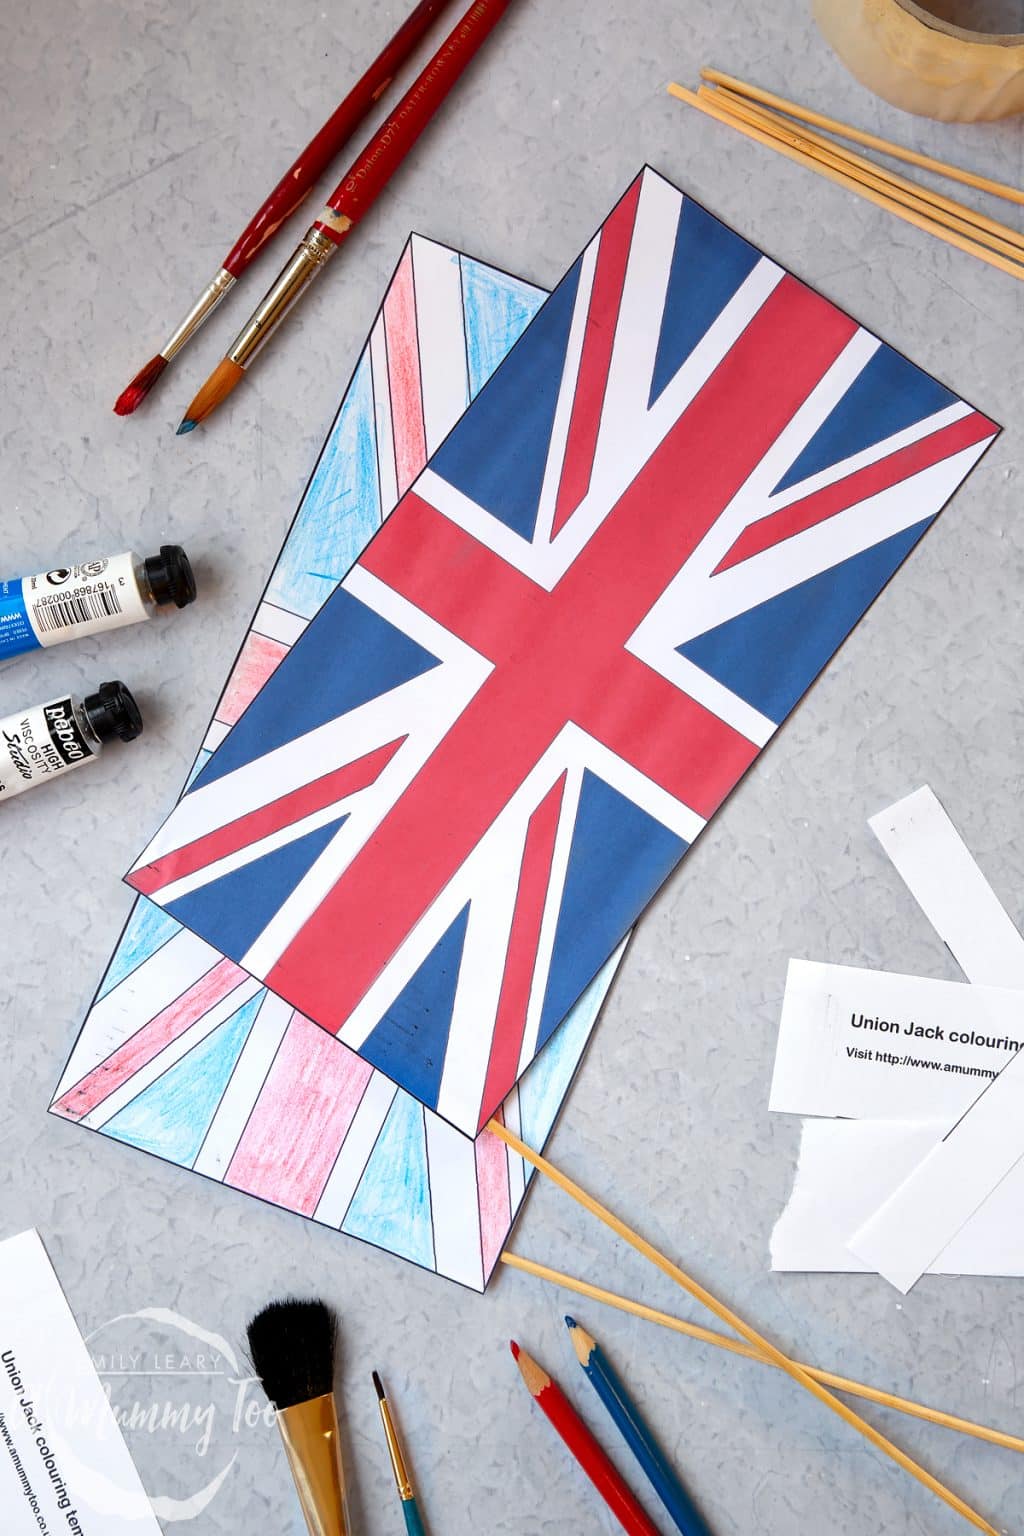 Union Jack Colouring In Template